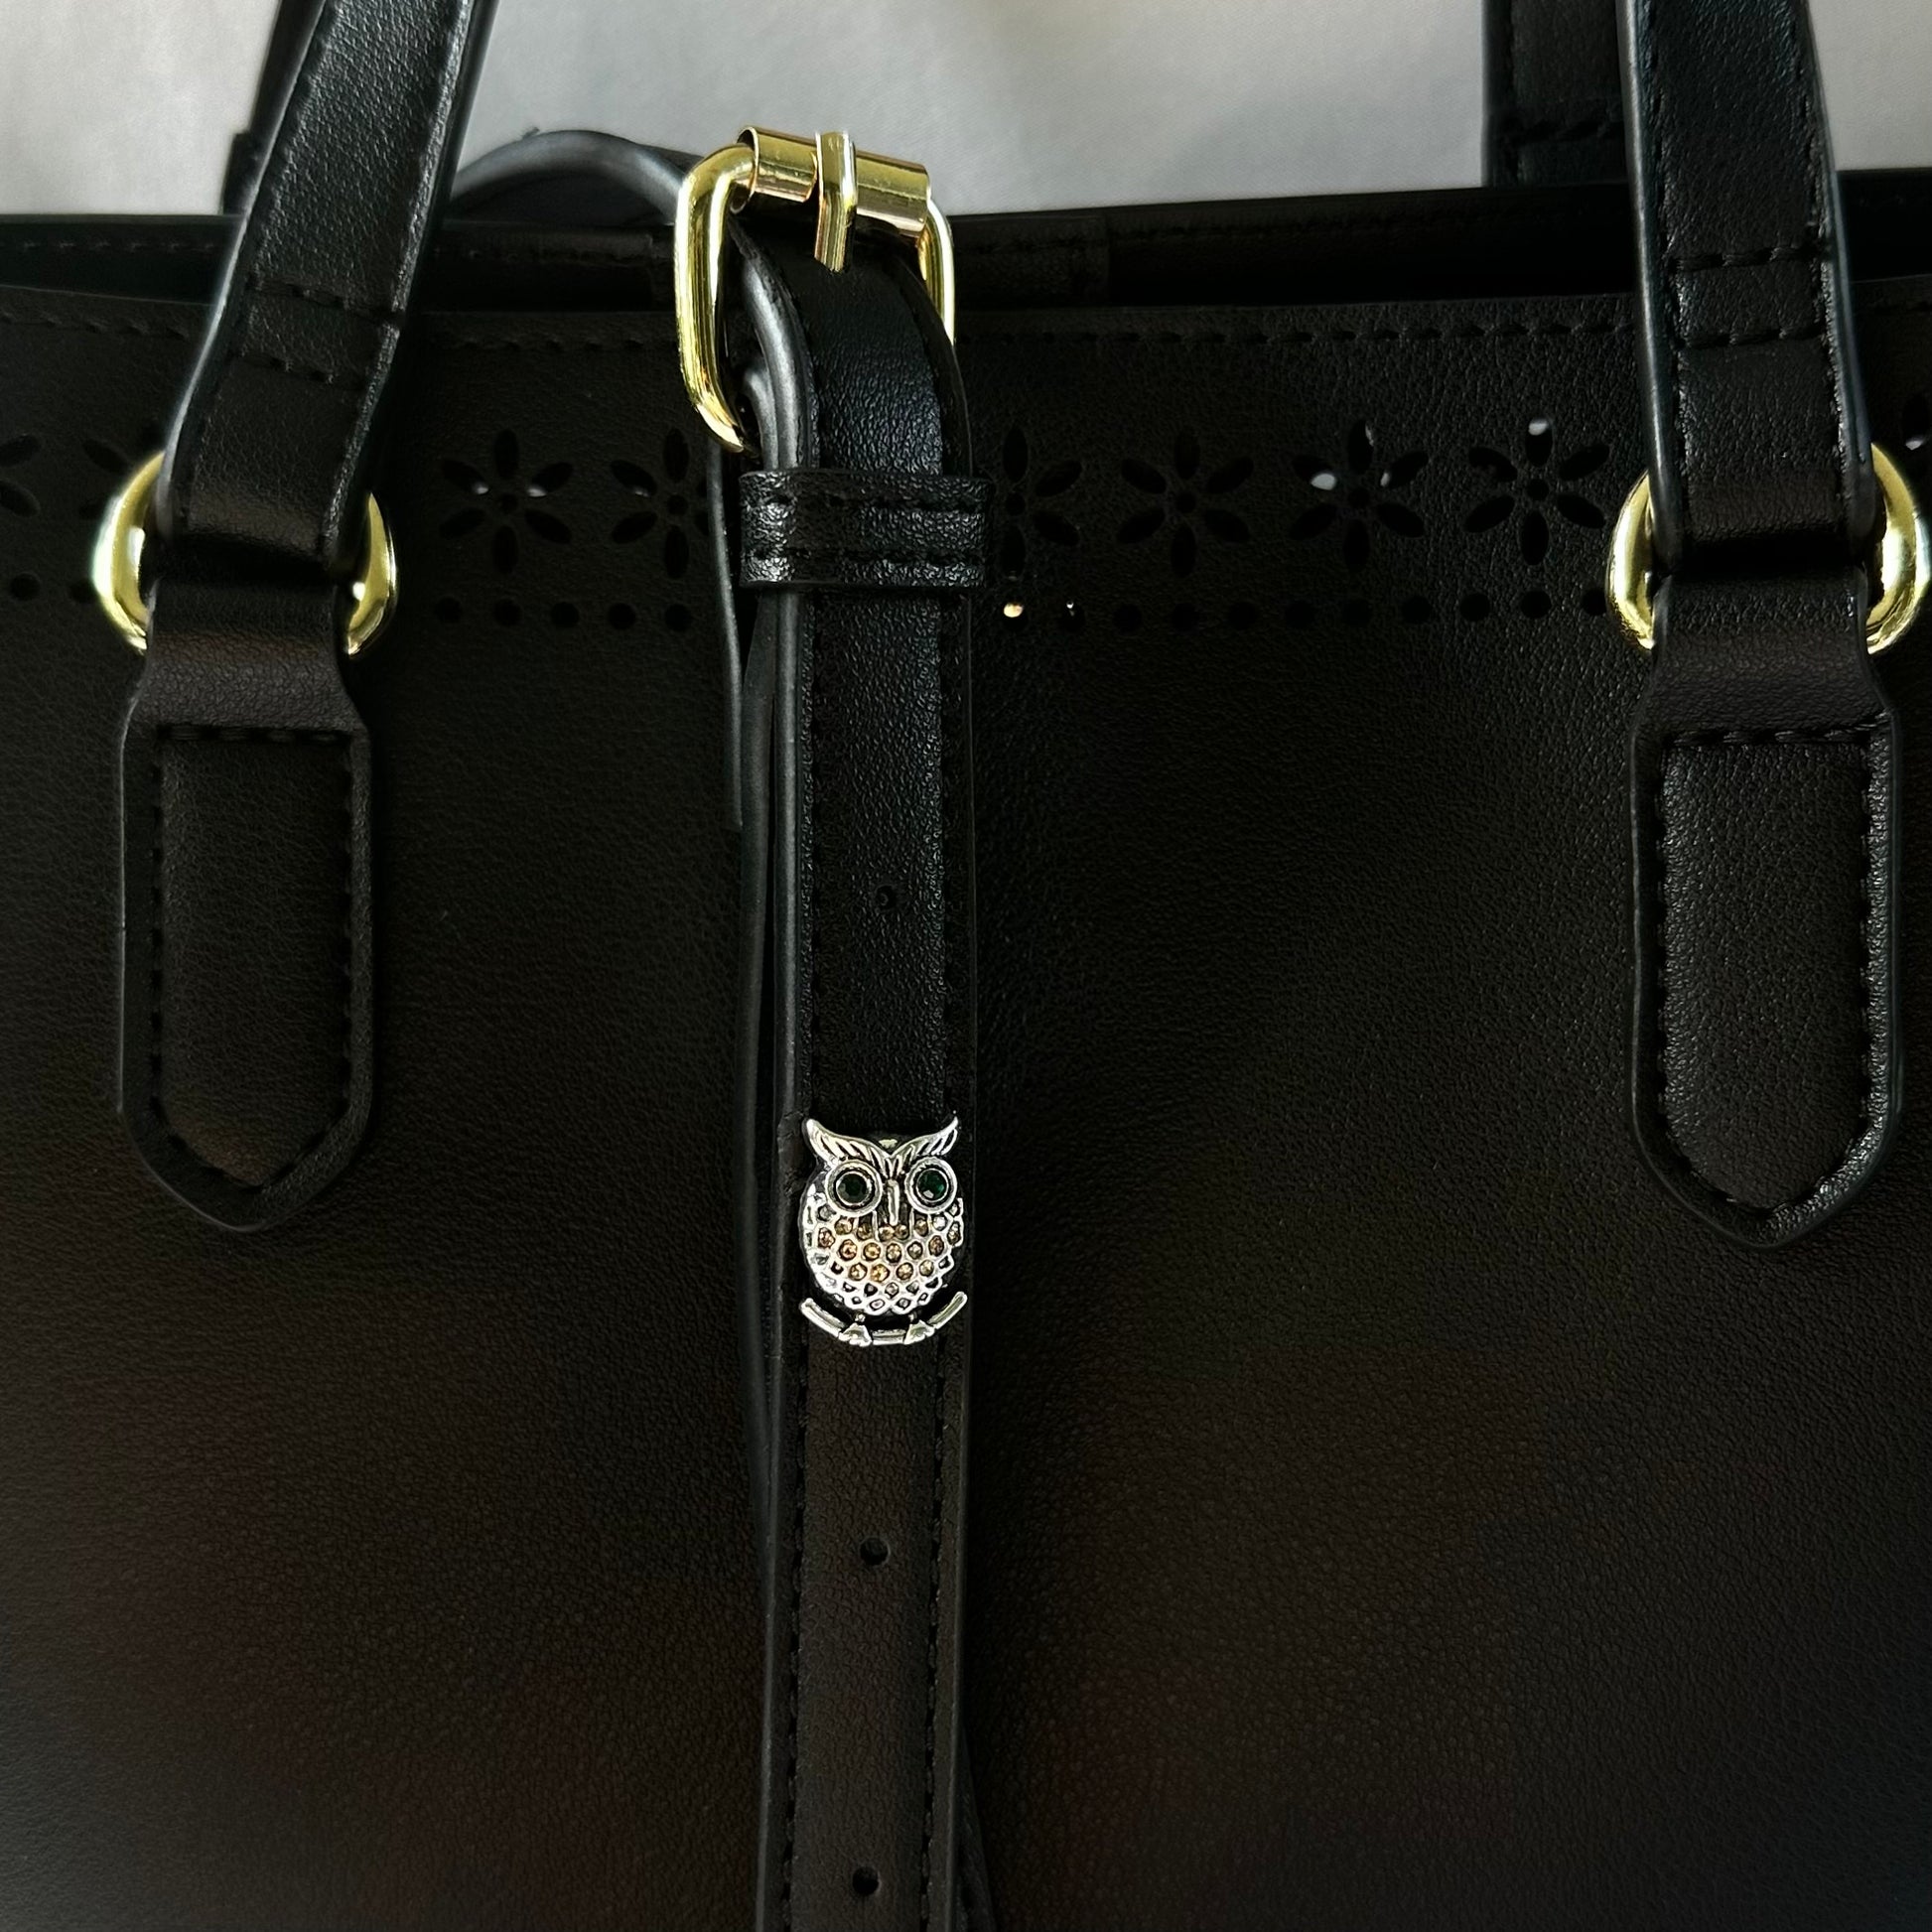 Owl Belt, Bag and Watch Band Charm